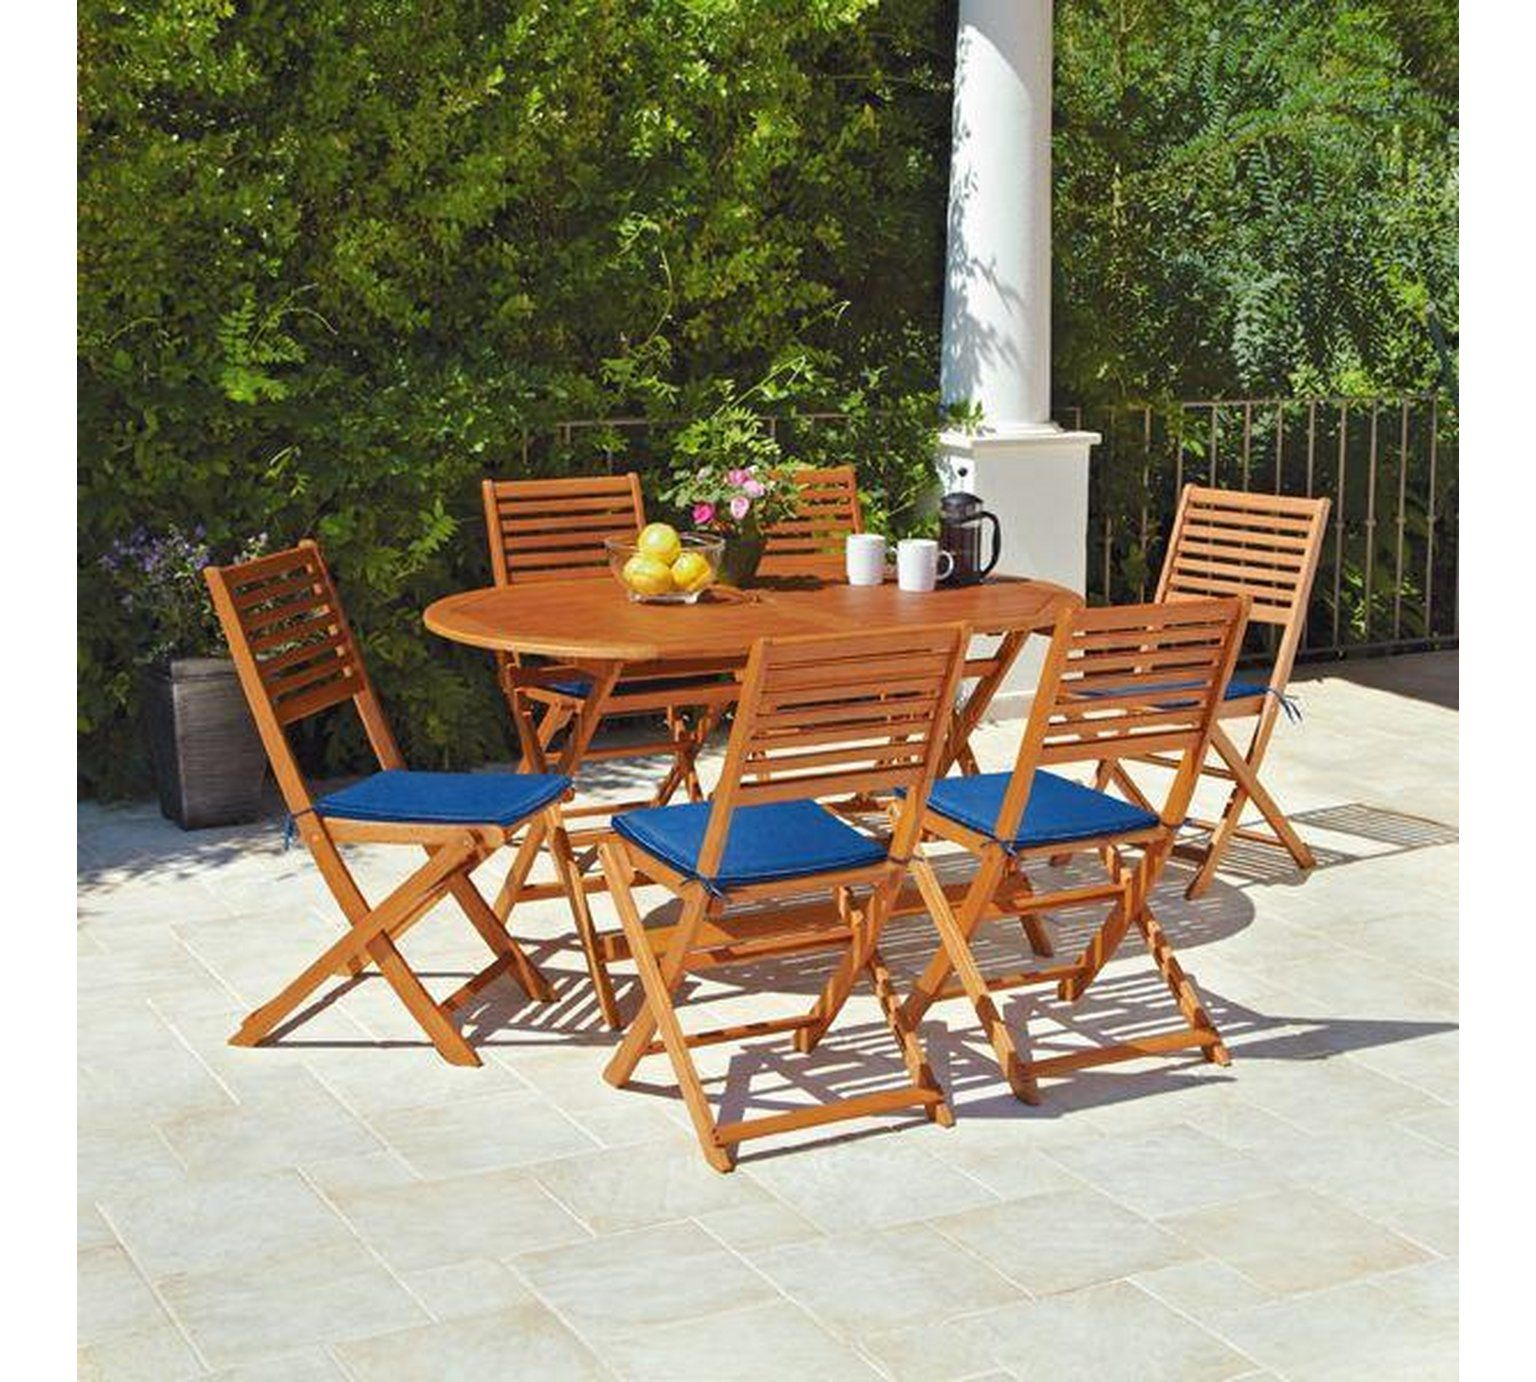 Home Newbury 6 Seater Wooden Patio Set Garden Table inside sizing 1536 X 1382